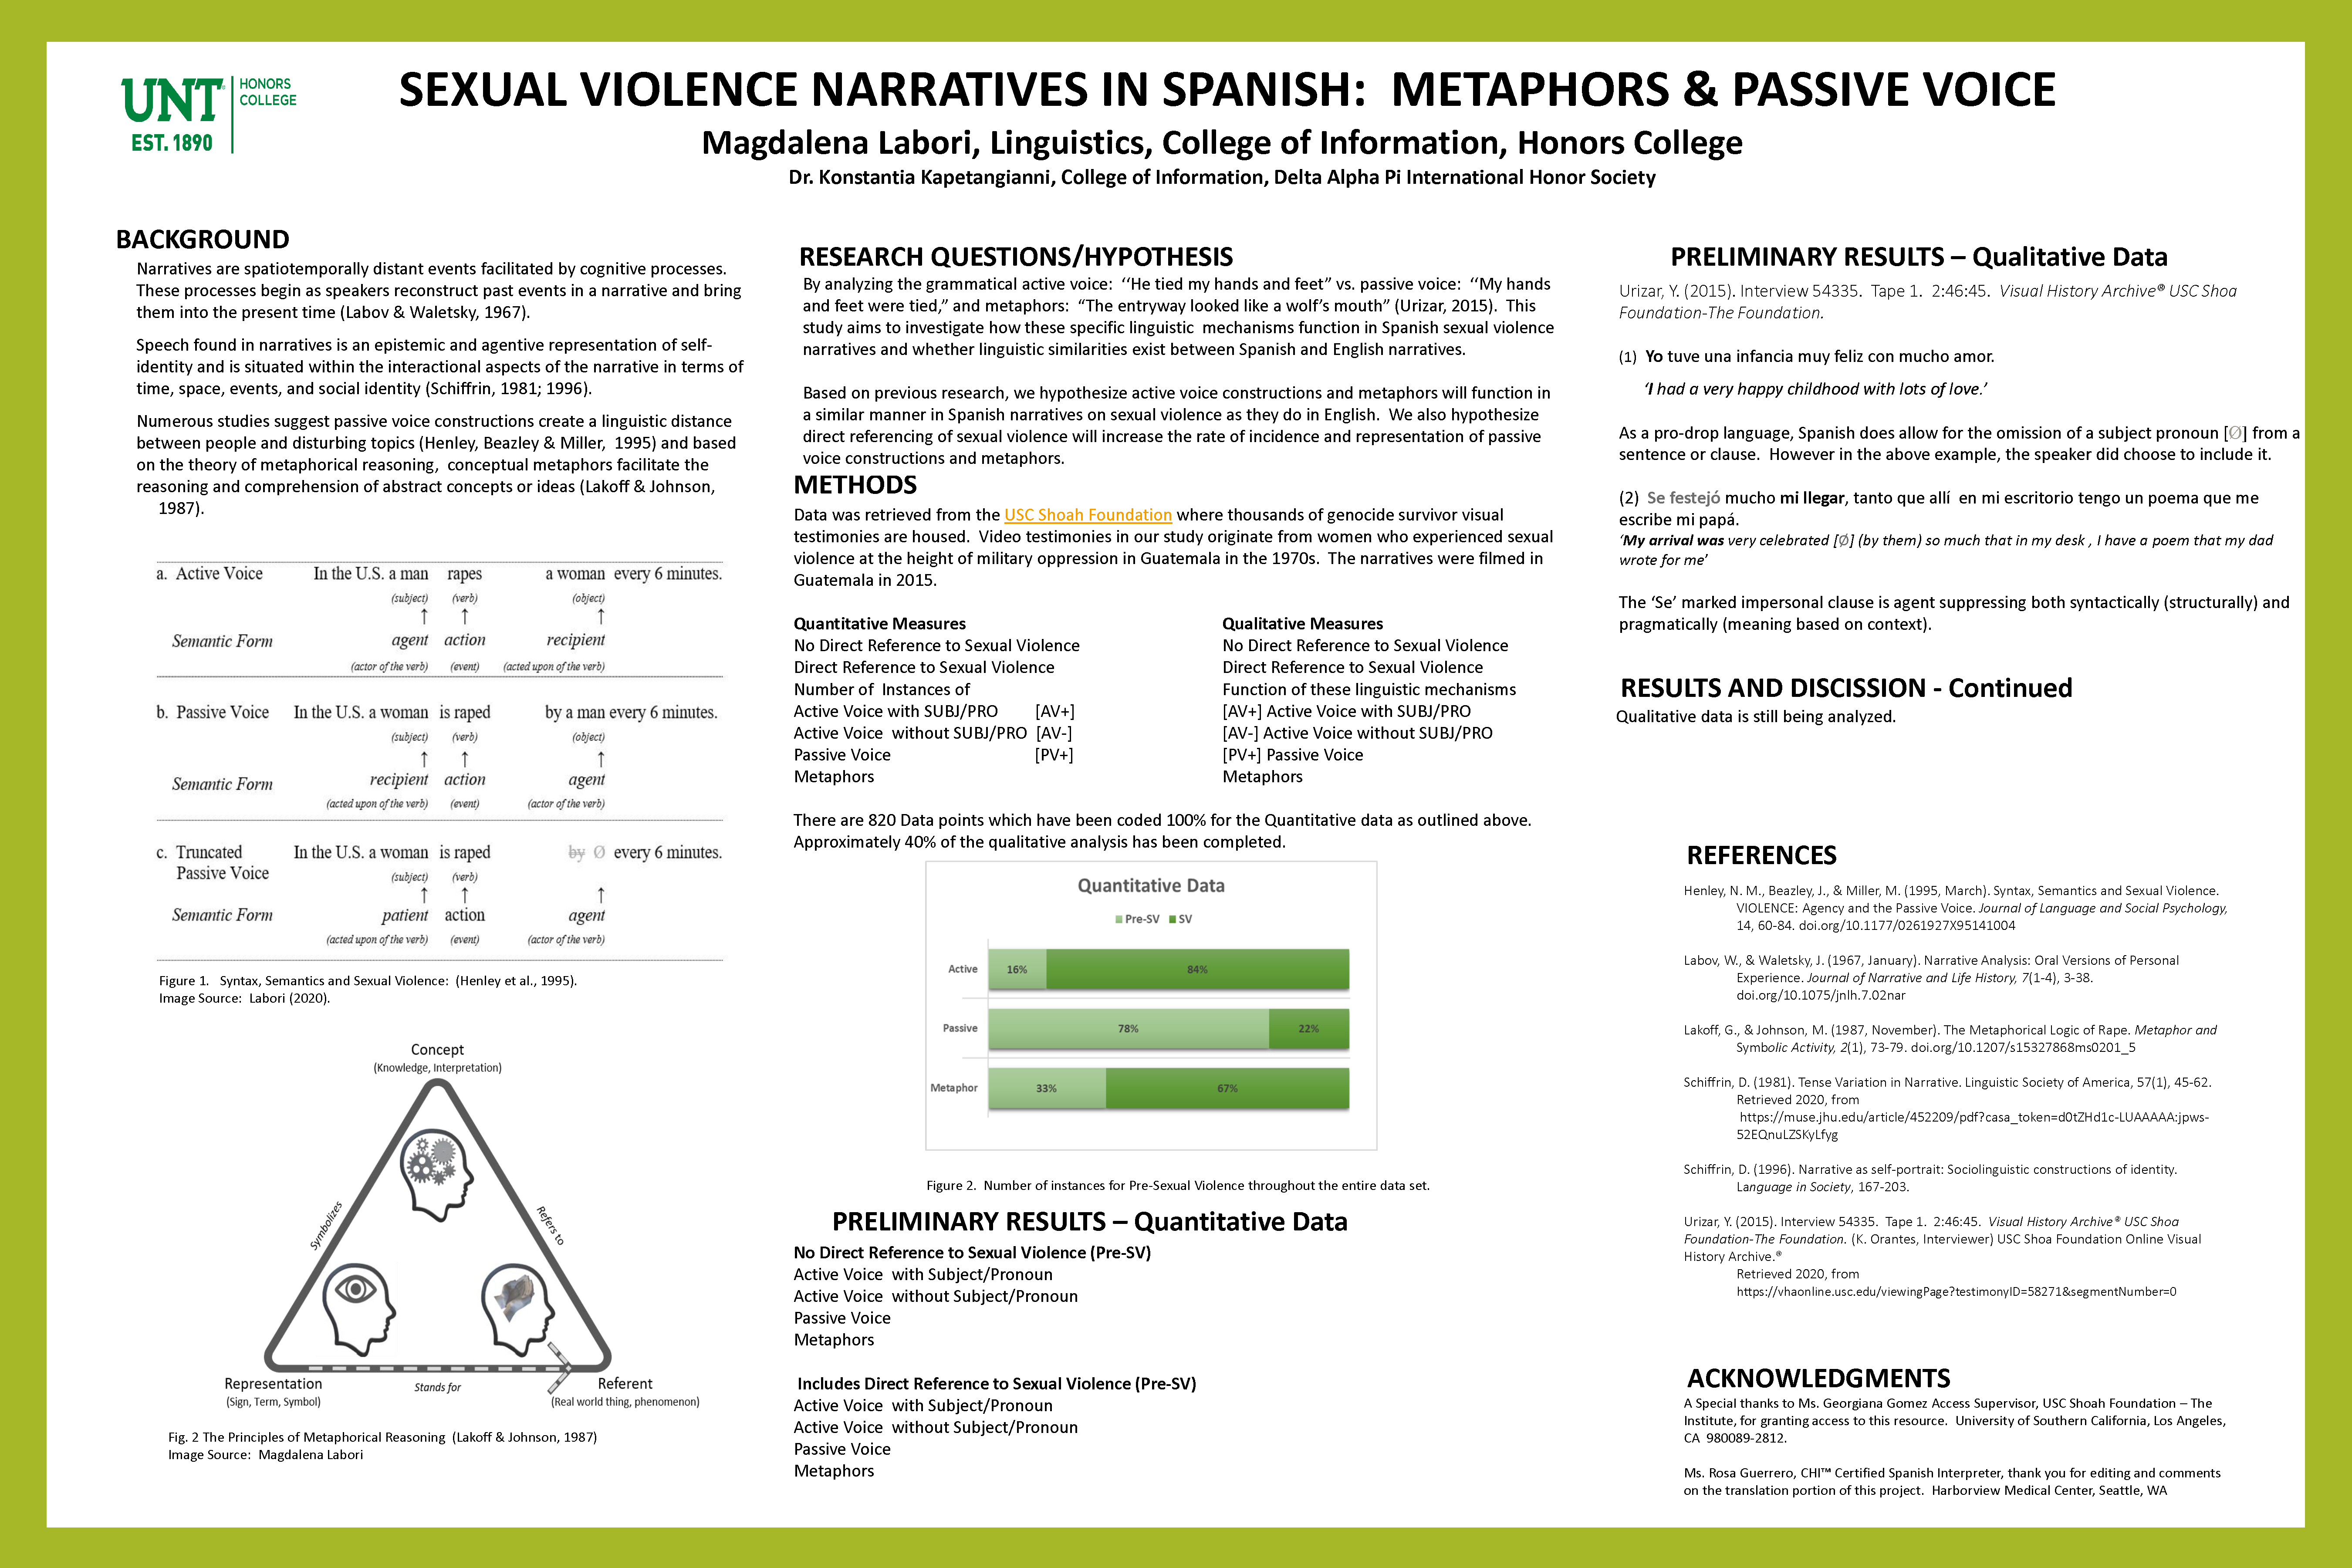 Sexual Violence Narratives in Spanish